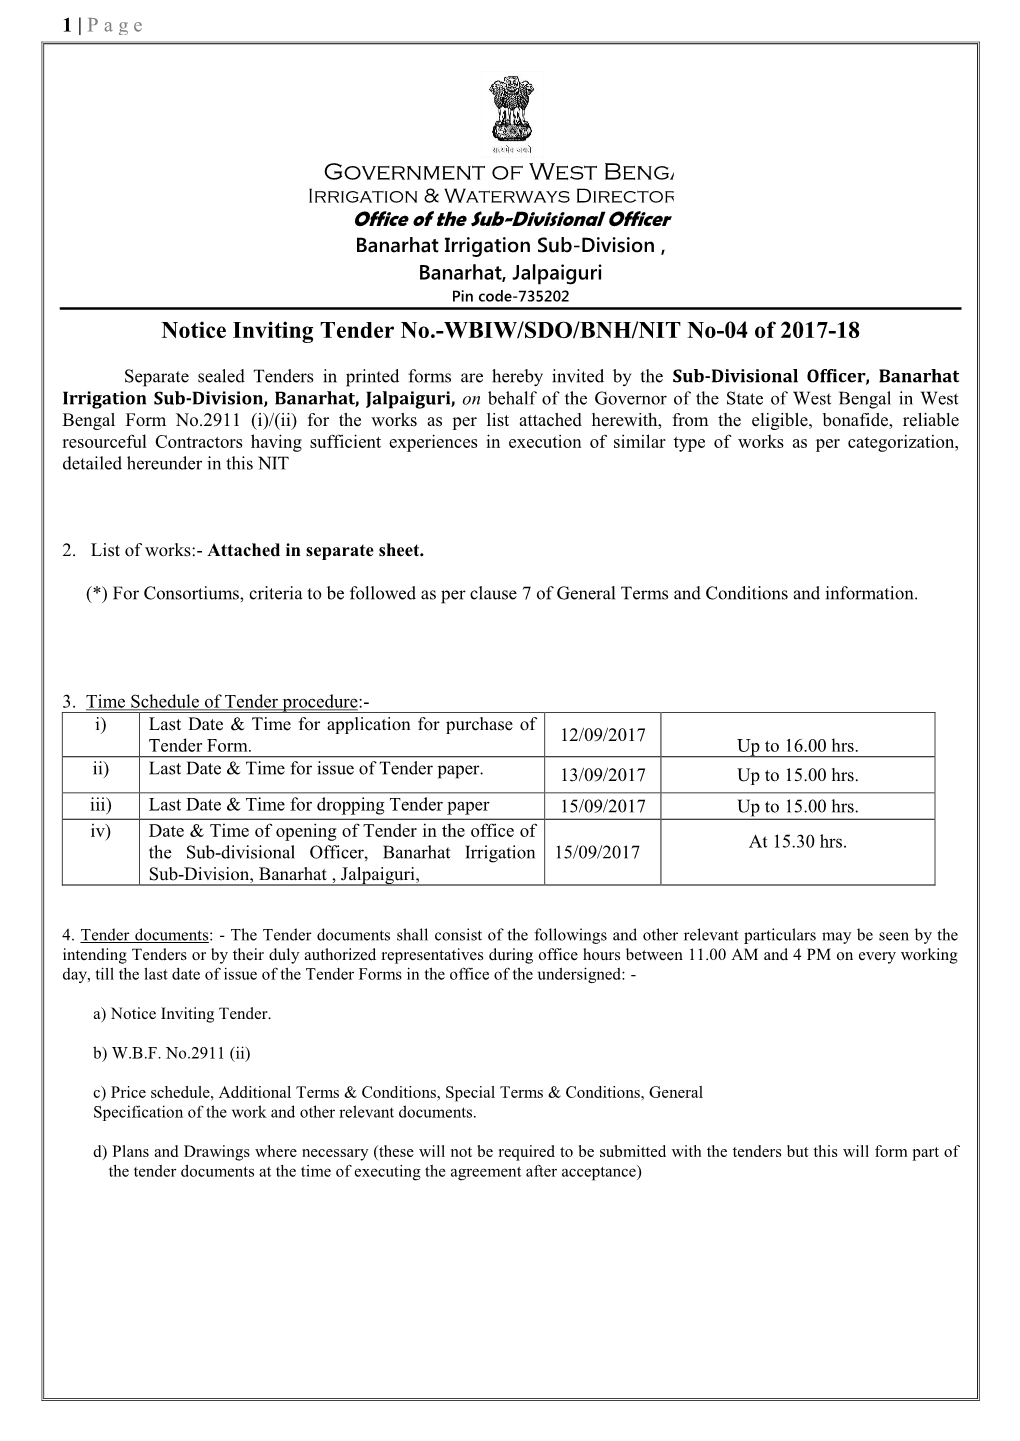 Government of West Bengal Notice Inviting Tender No.-WBIW/SDO